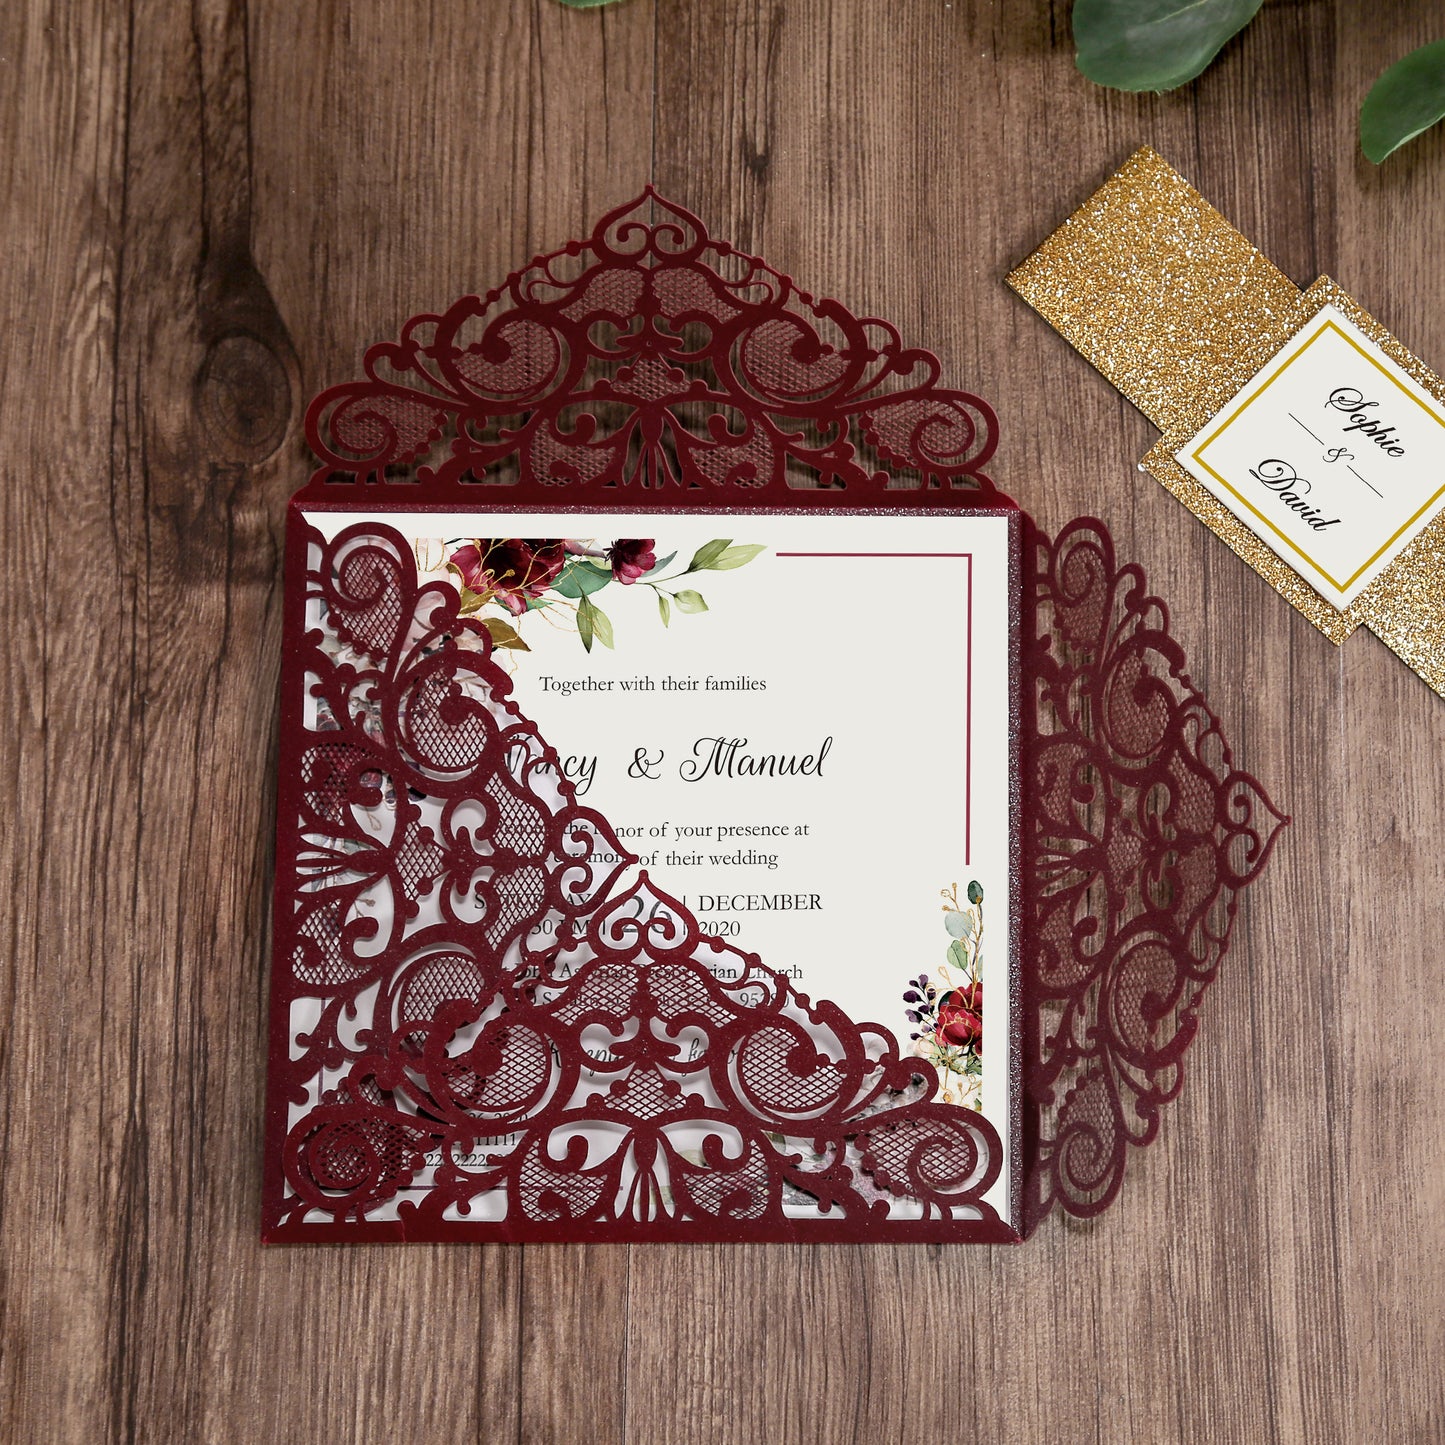 Square Burgundy Wedding Invitations with Gold Glitter Belly Band for Wedding